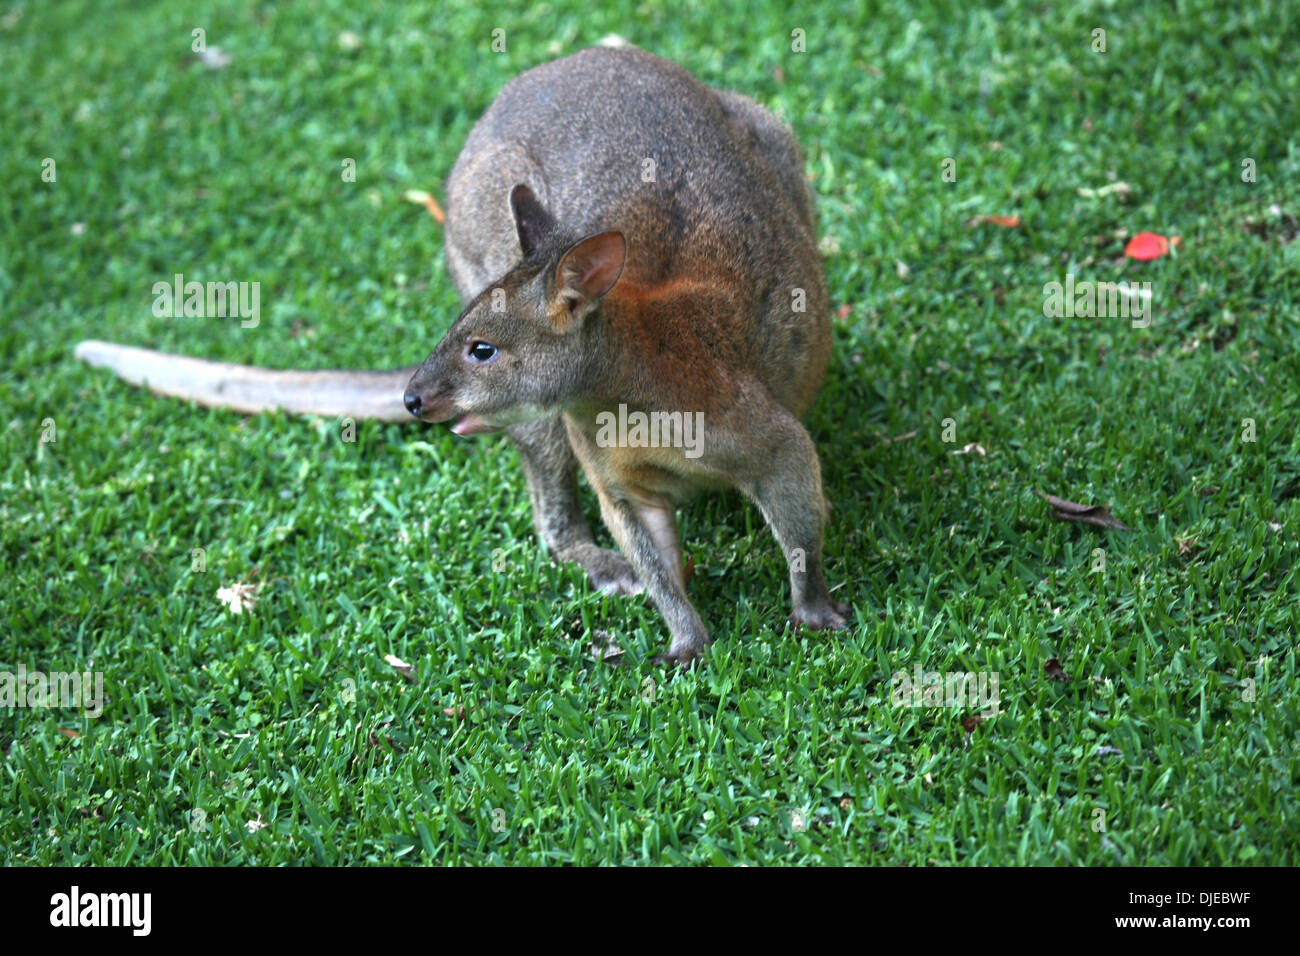 Red Necked Pademelon a compact macropod known for reddish brown fur around its neck and shoulders. Stock Photo